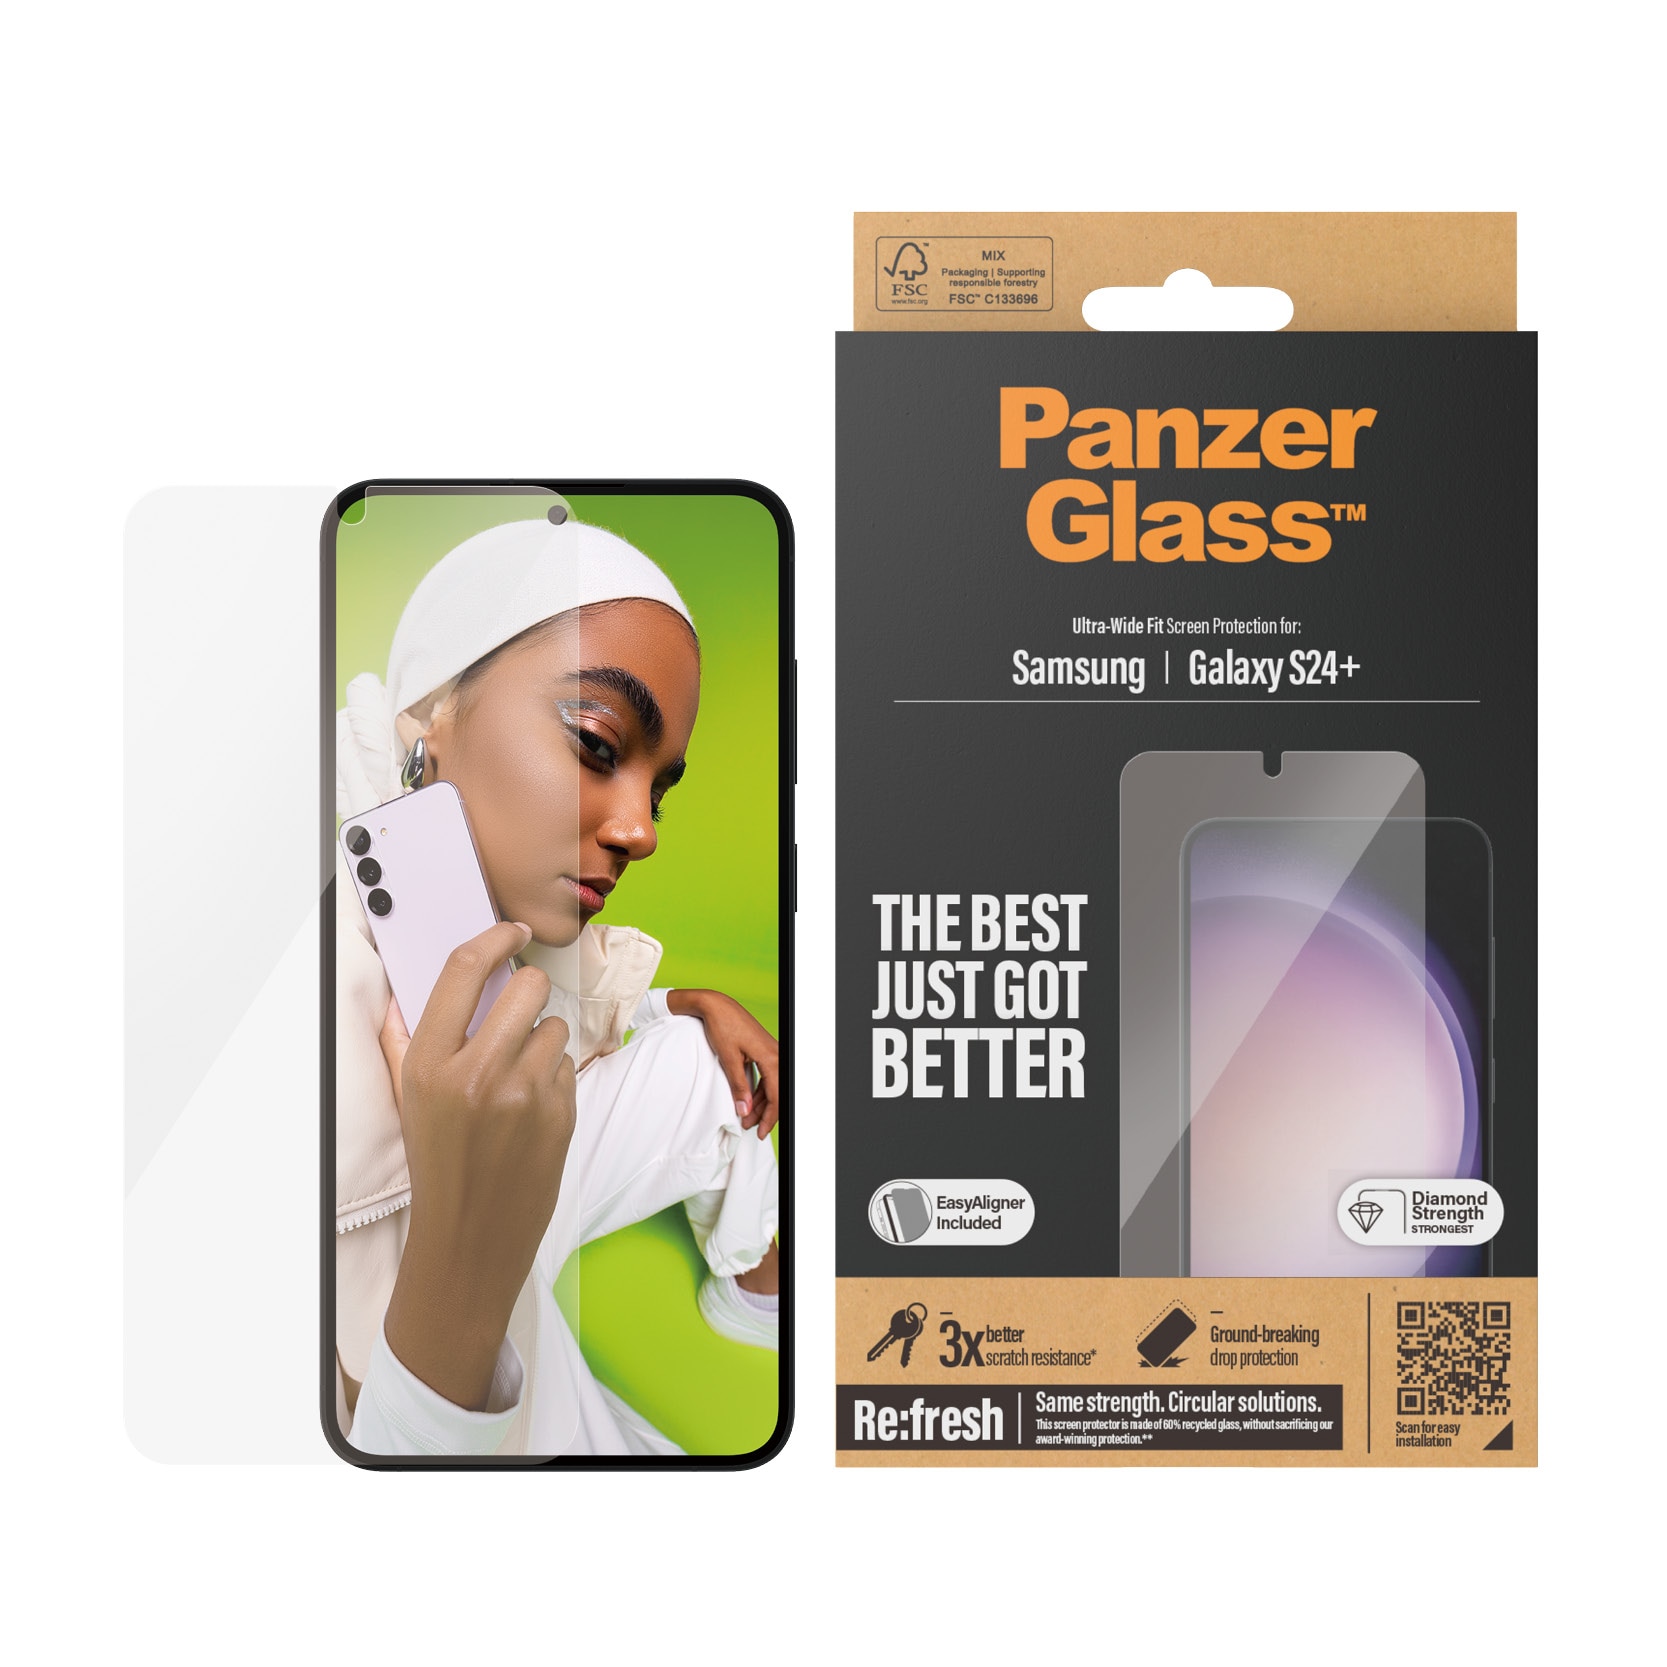 Samsung Galaxy S24 Plus Screen Protector (with EasyAligner) Ultra Wide Fit